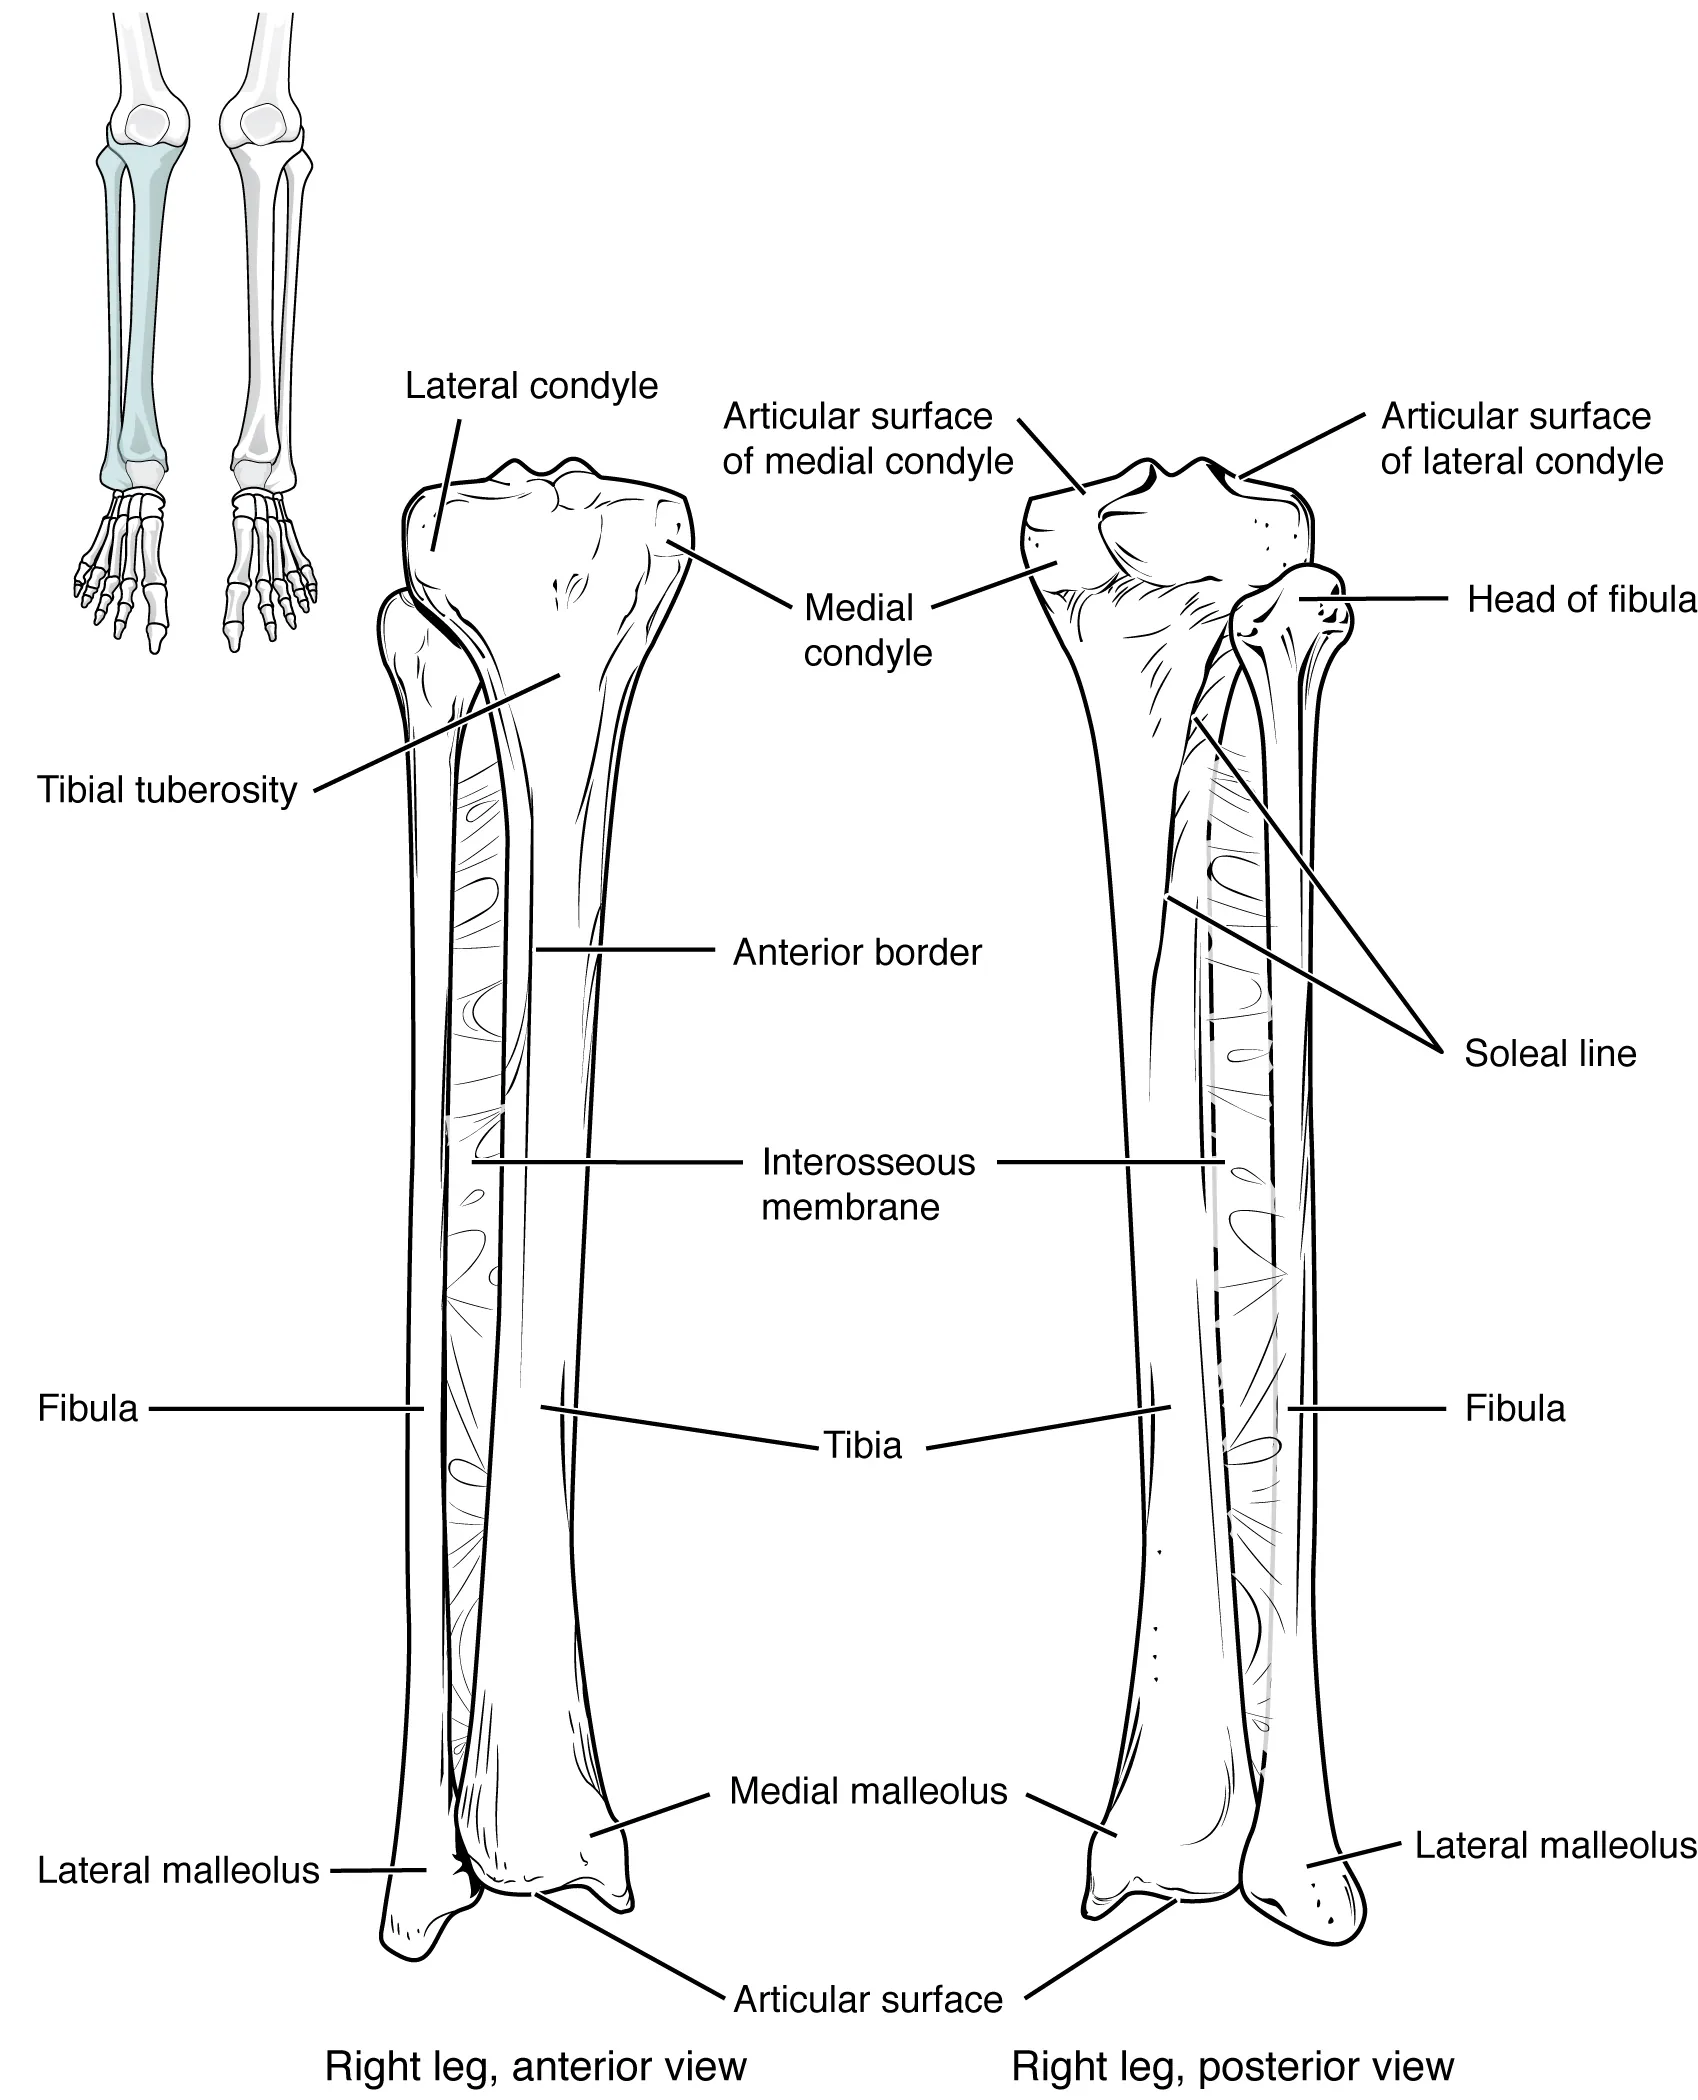 This image shows the structure of the tibia and the fibula. The left panel shows the anterior view, and the right panel shows the posterior view.